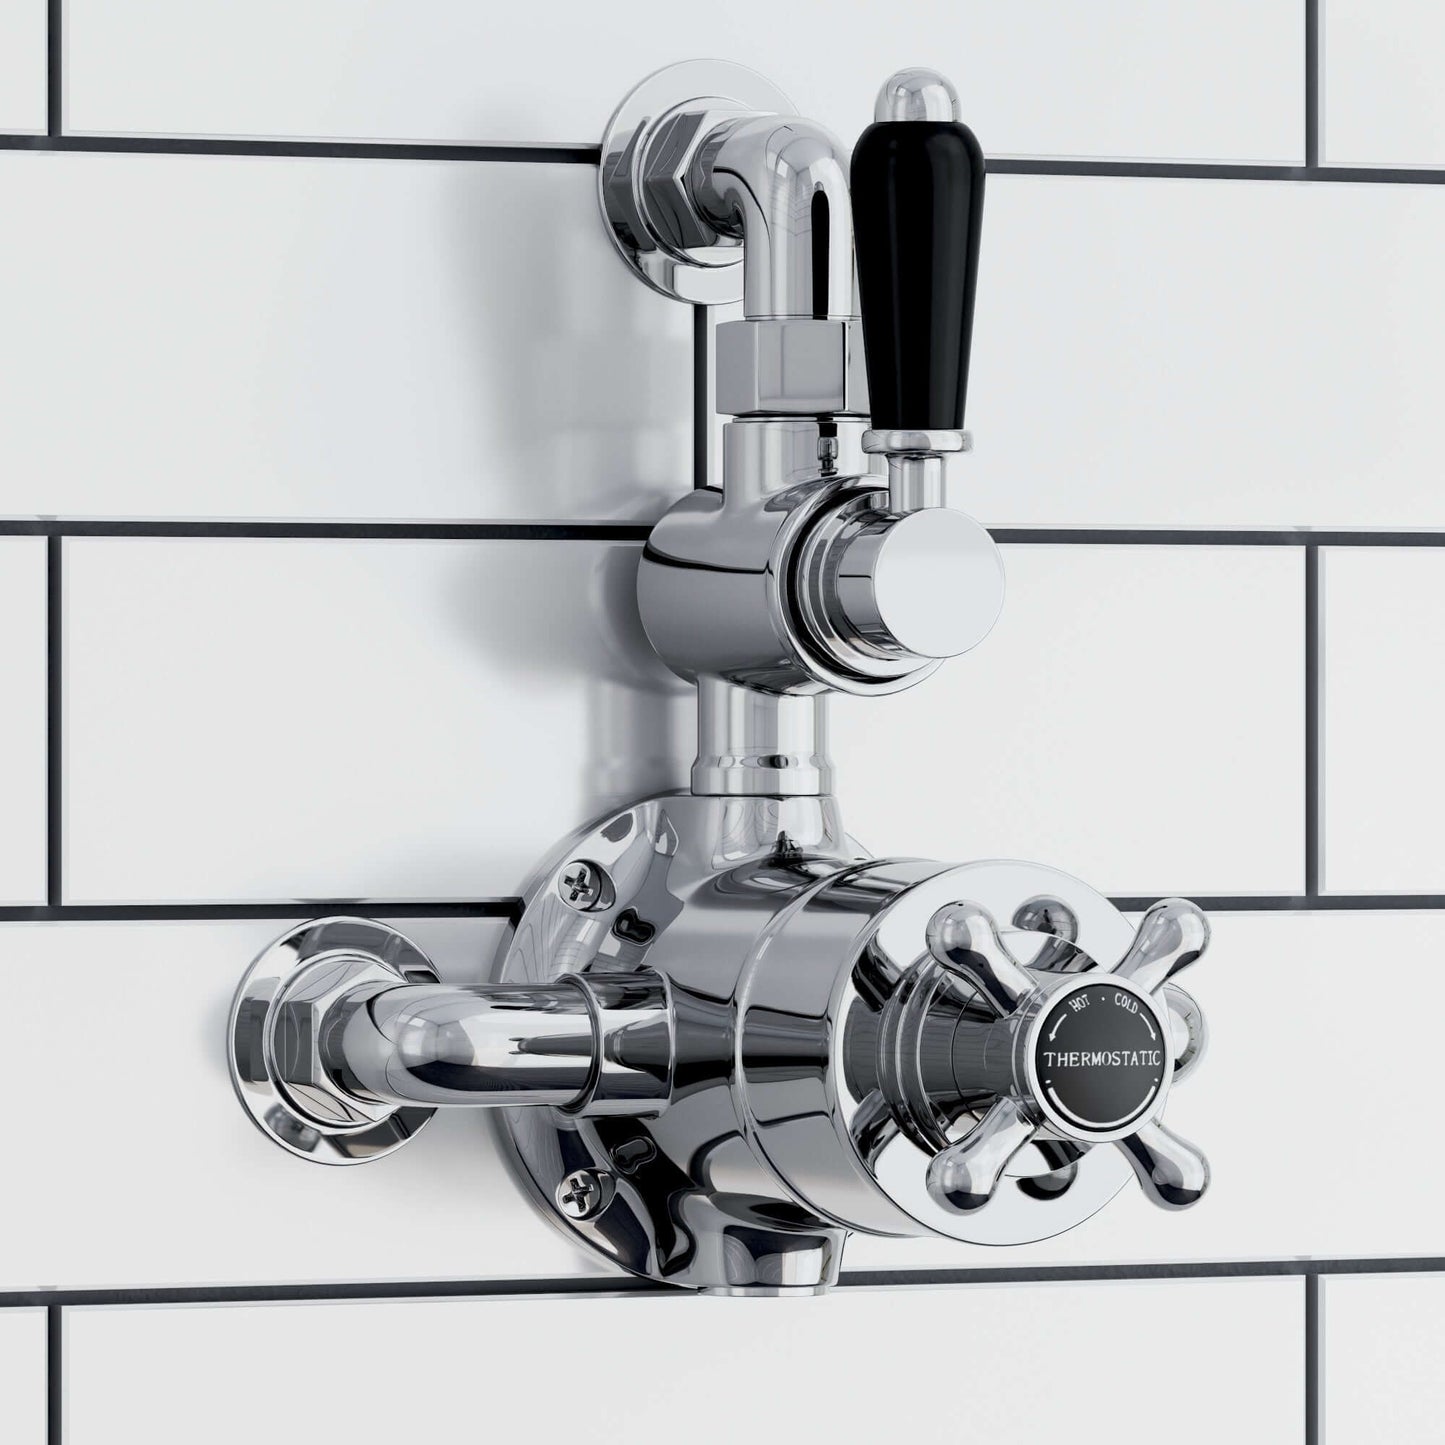 Downton Traditional Twin Thermostatic Shower Valve Exposed With Top Return To Wall Bend - Chrome With Black Levers